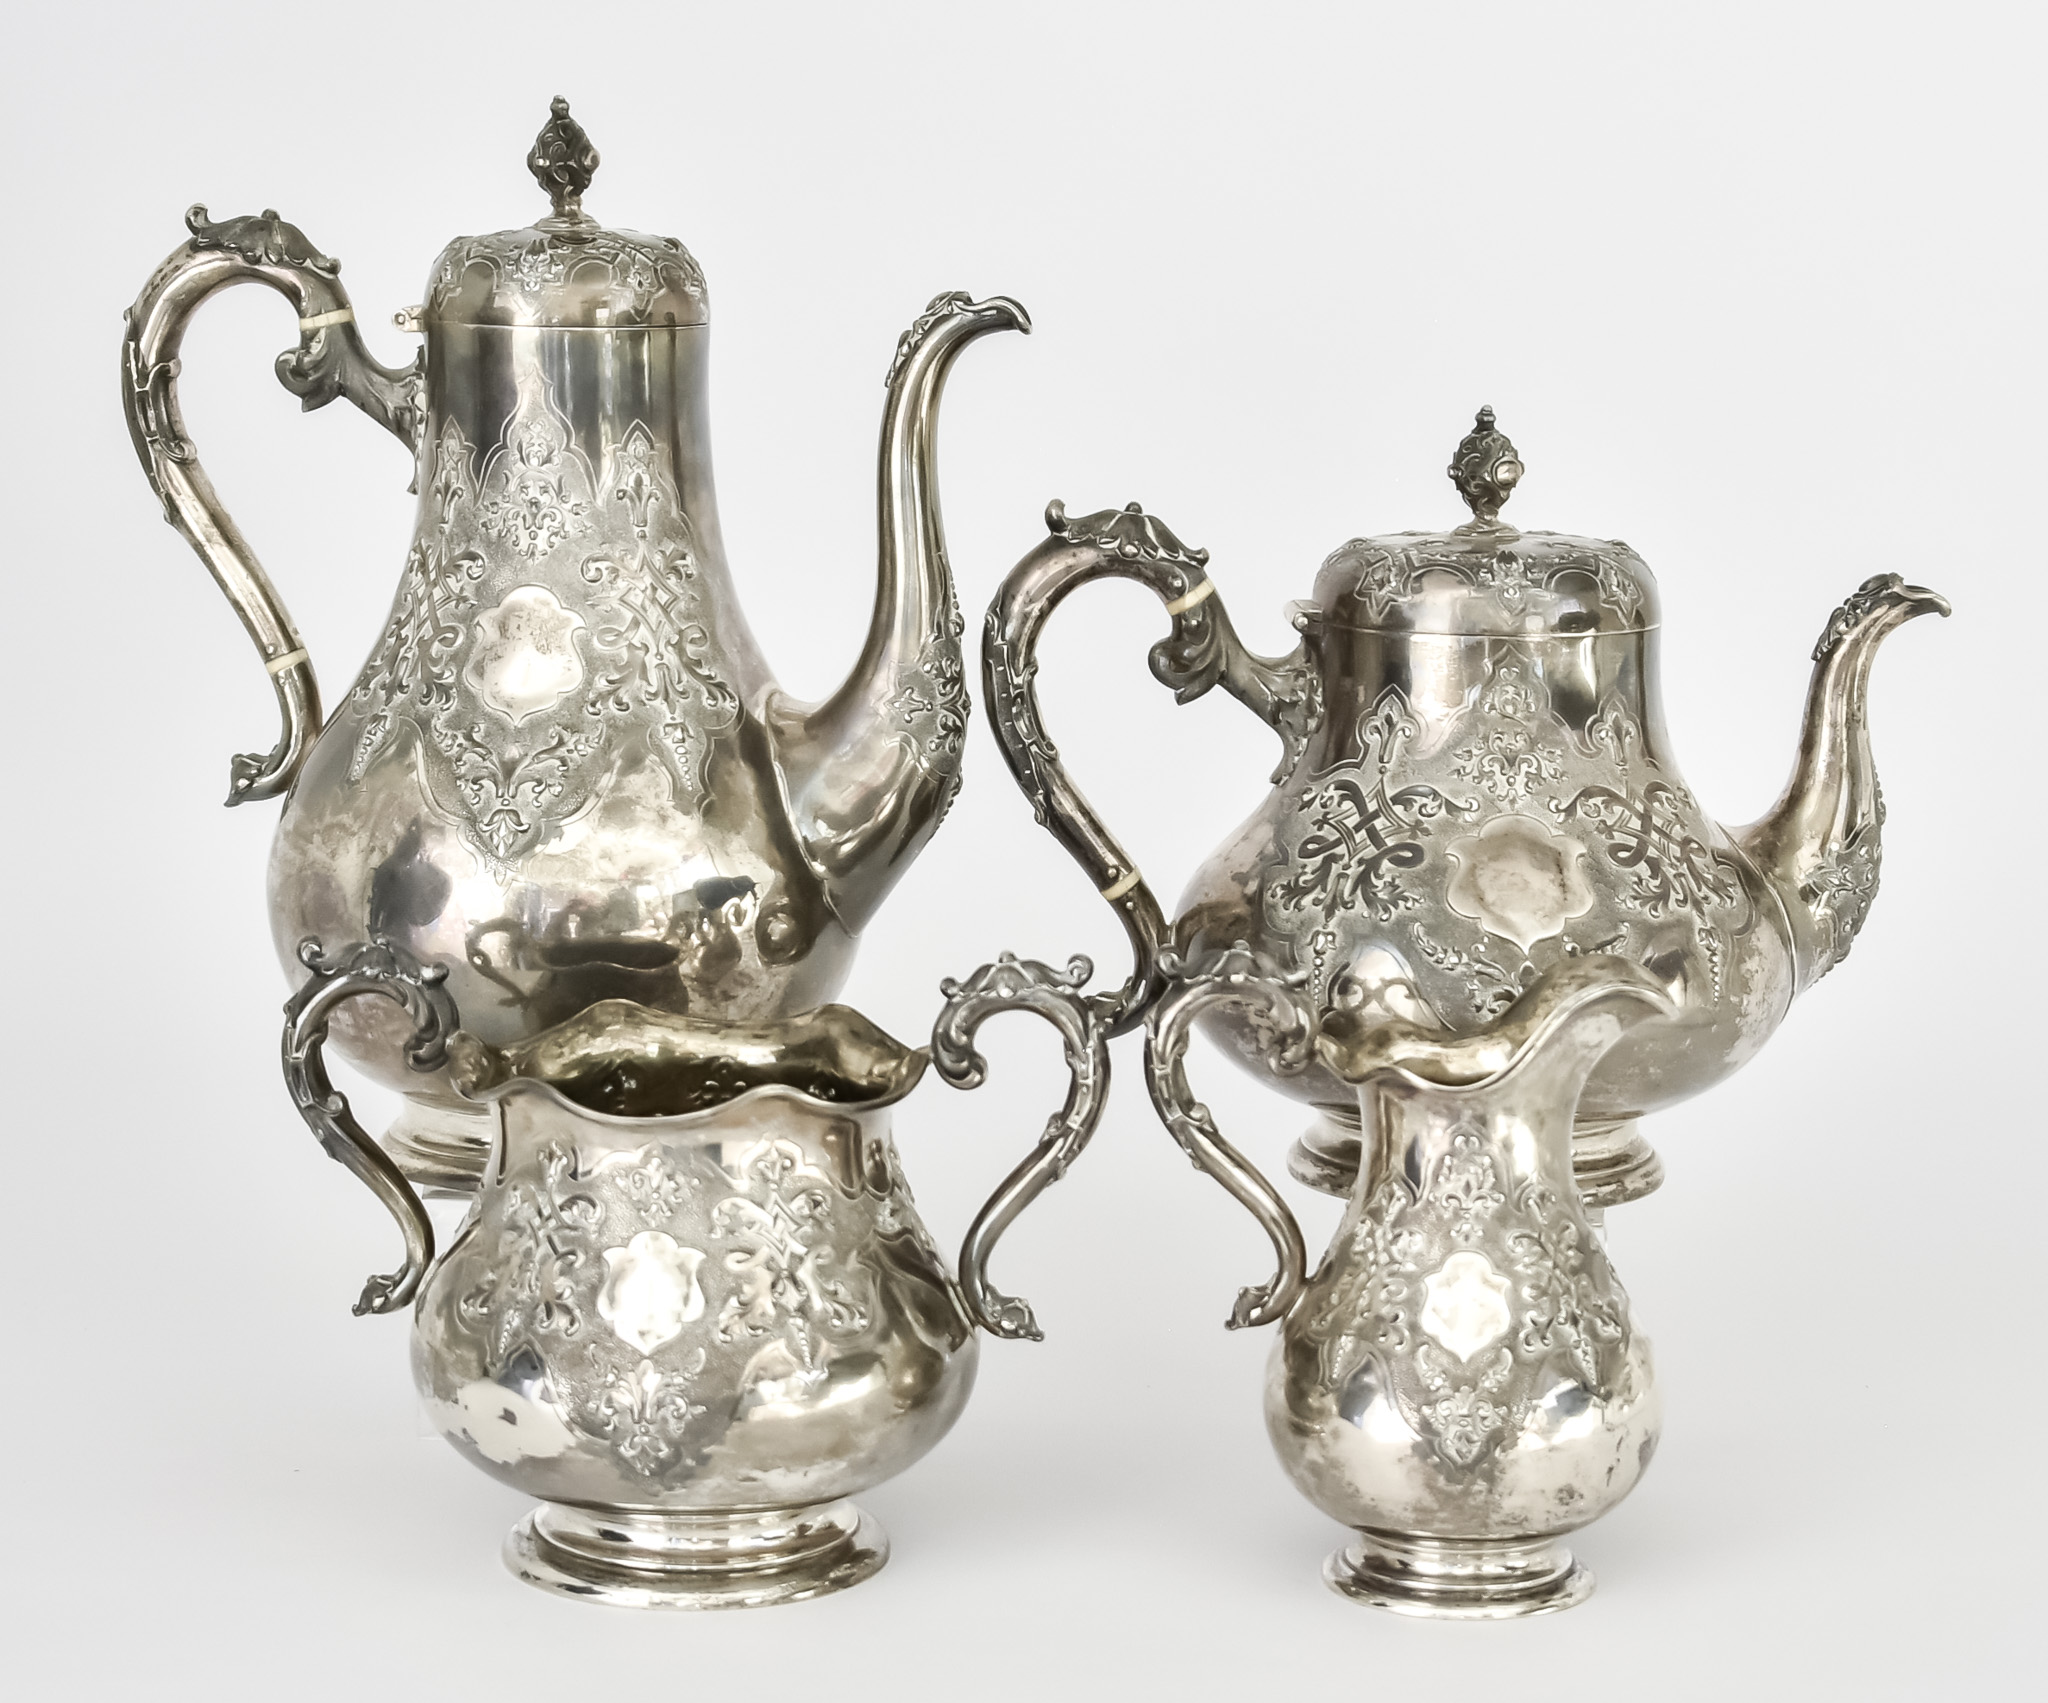 A Victorian Silver Four-Piece Tea and Coffee Service, by Robert Hennell III, London 1860 and